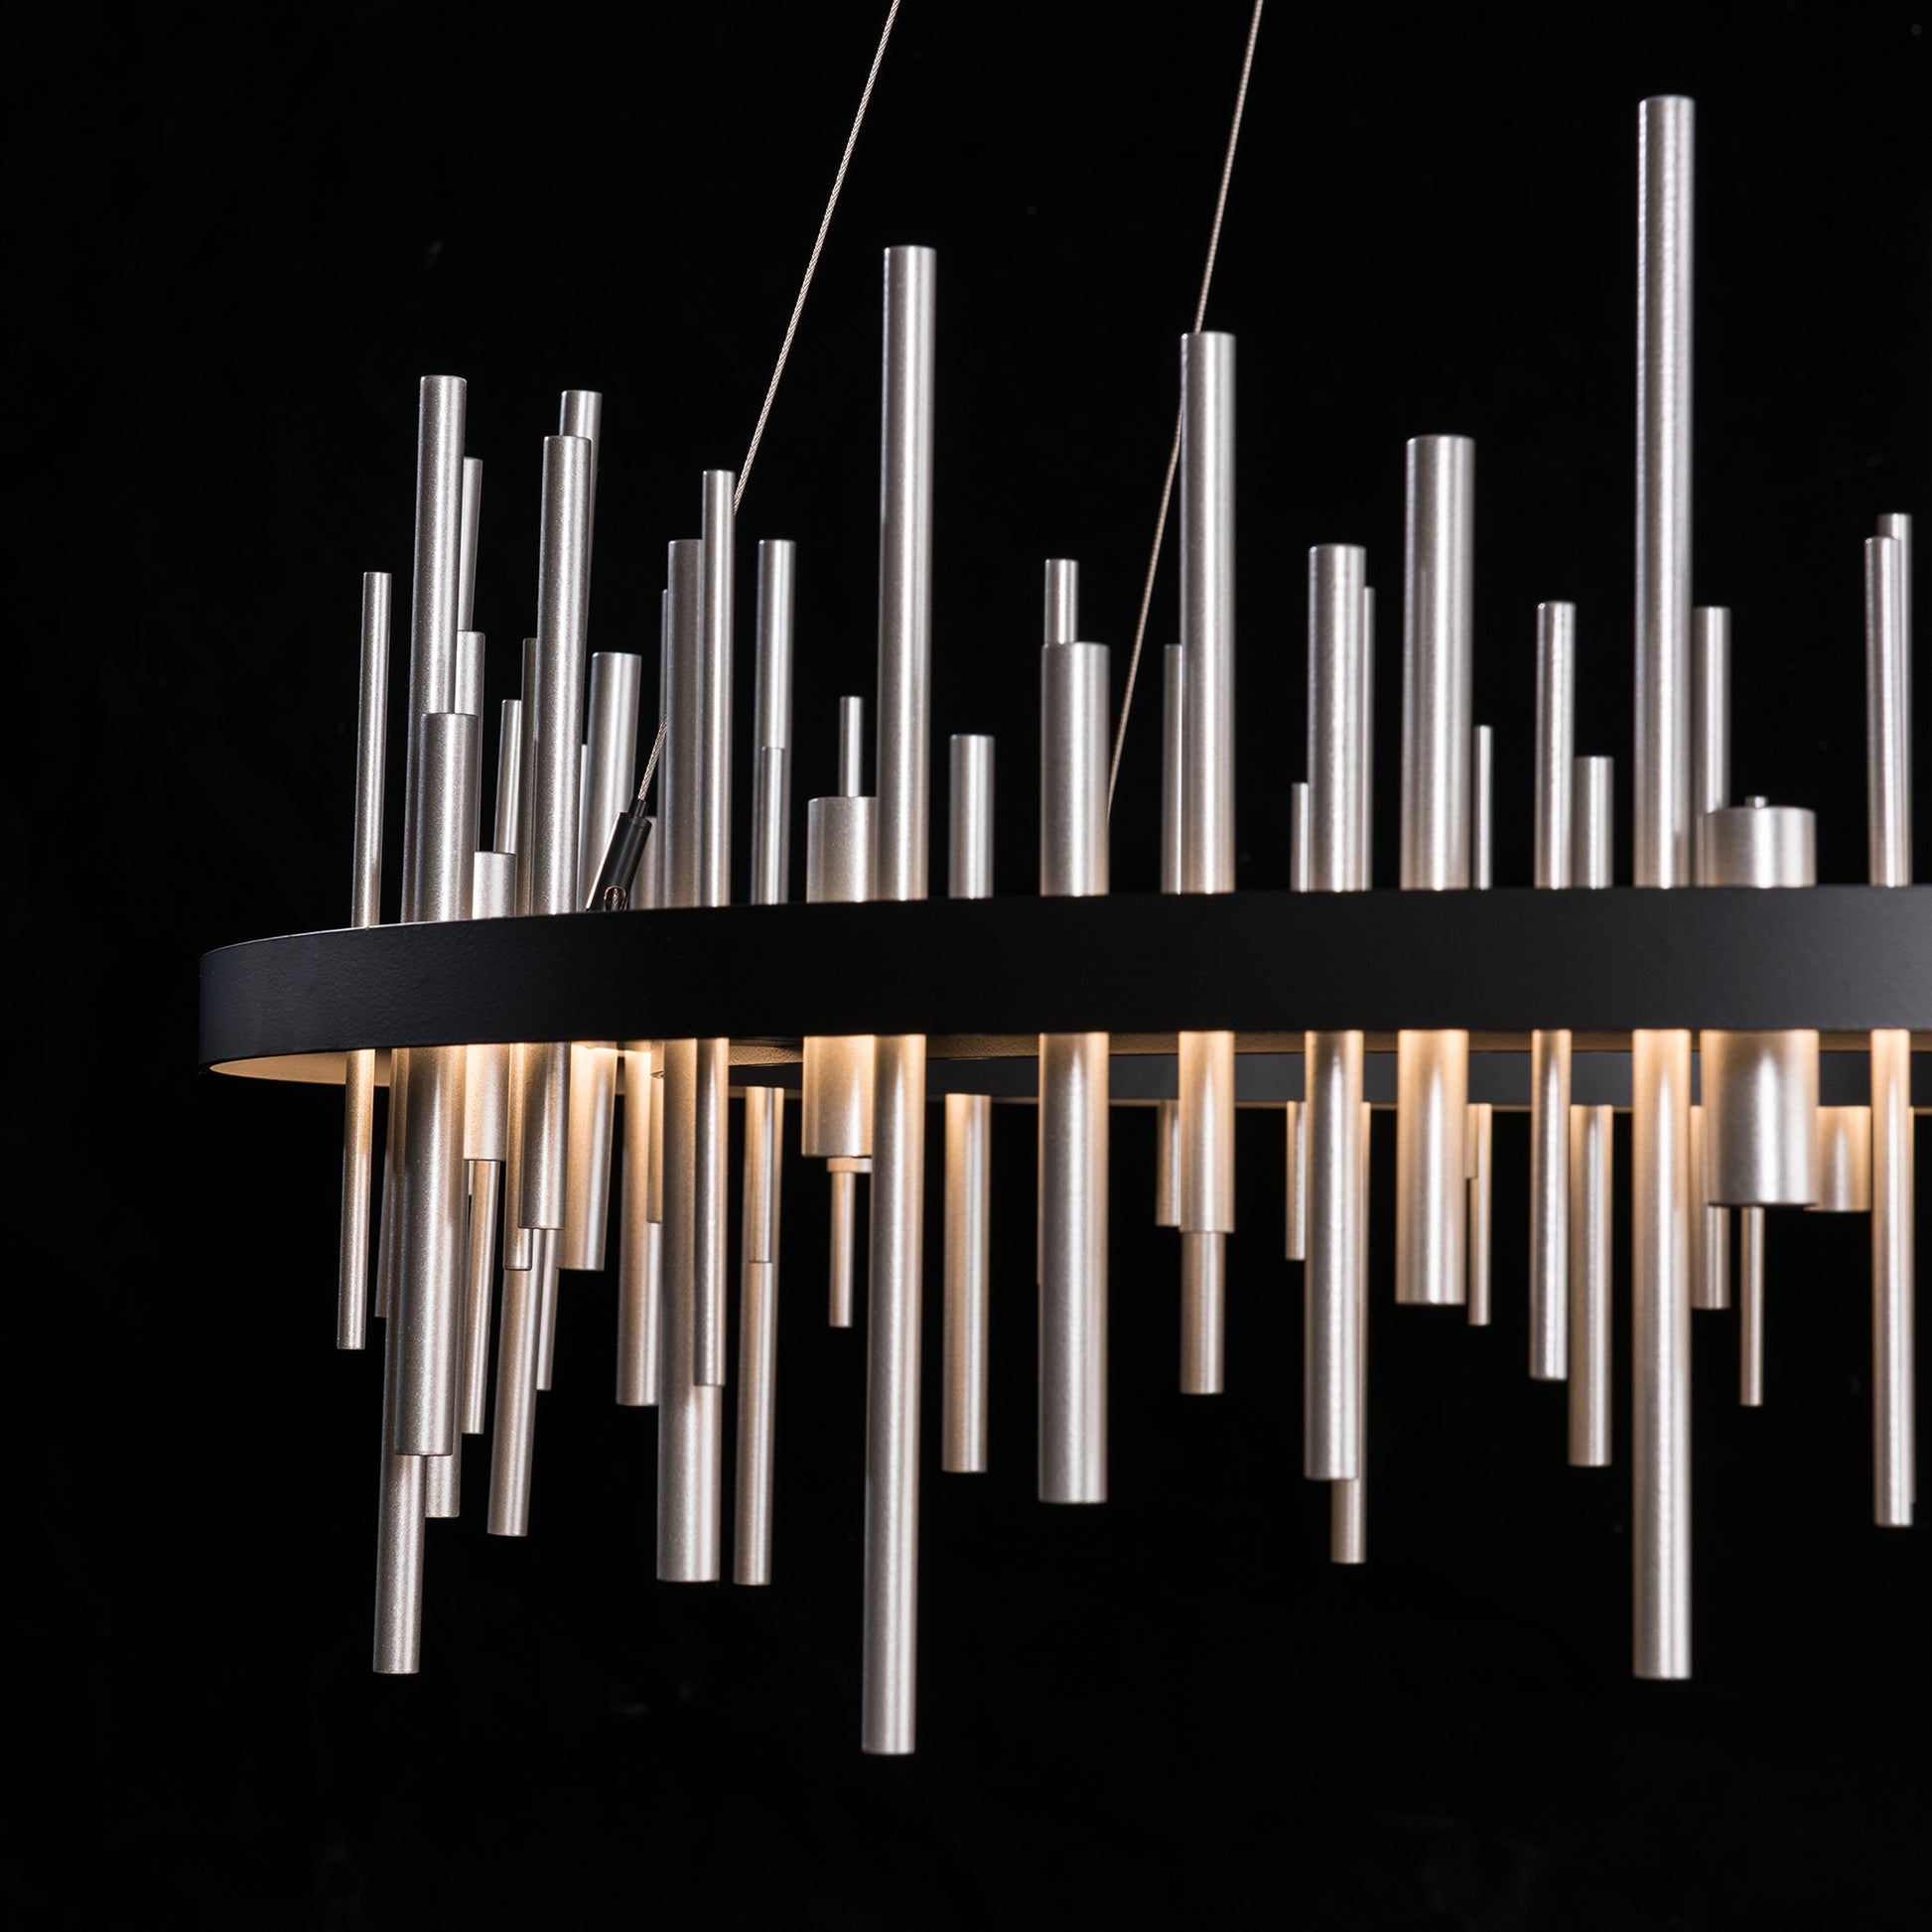 A Hubbardton Forge Circular Cityscape Pendant made of metal rods hanging from a black background.